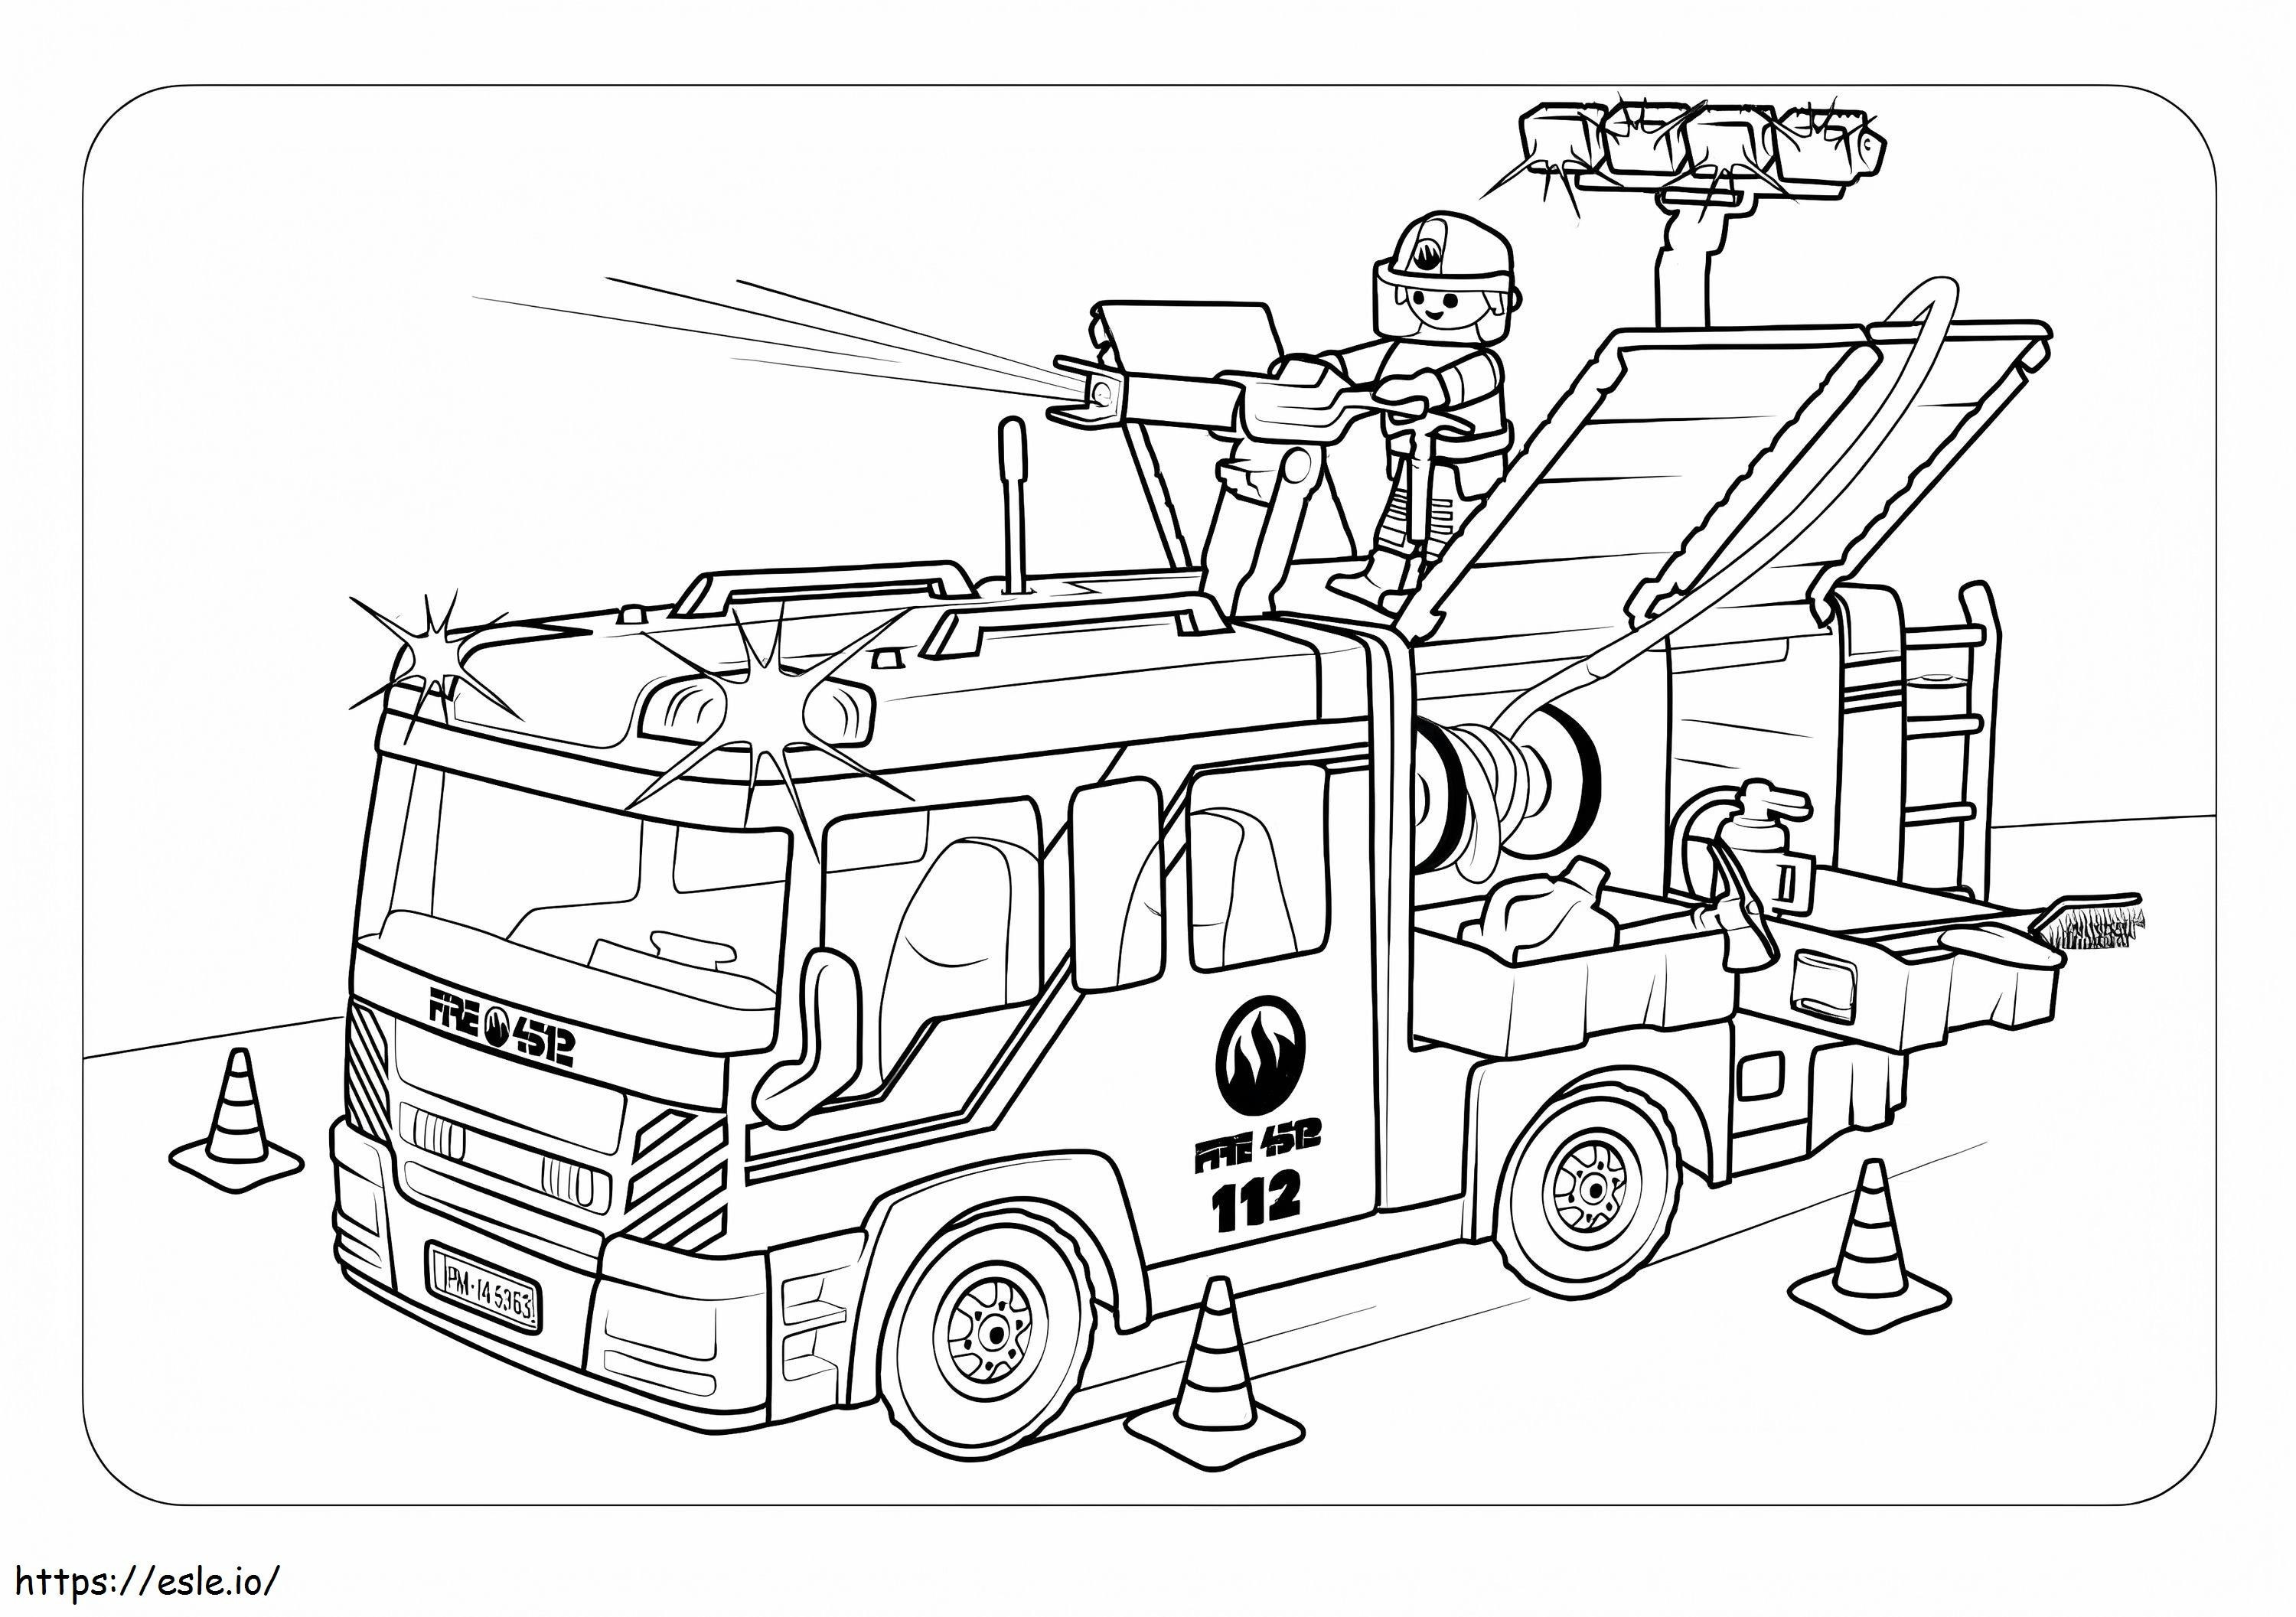 Playmobil Fire Truck coloring page